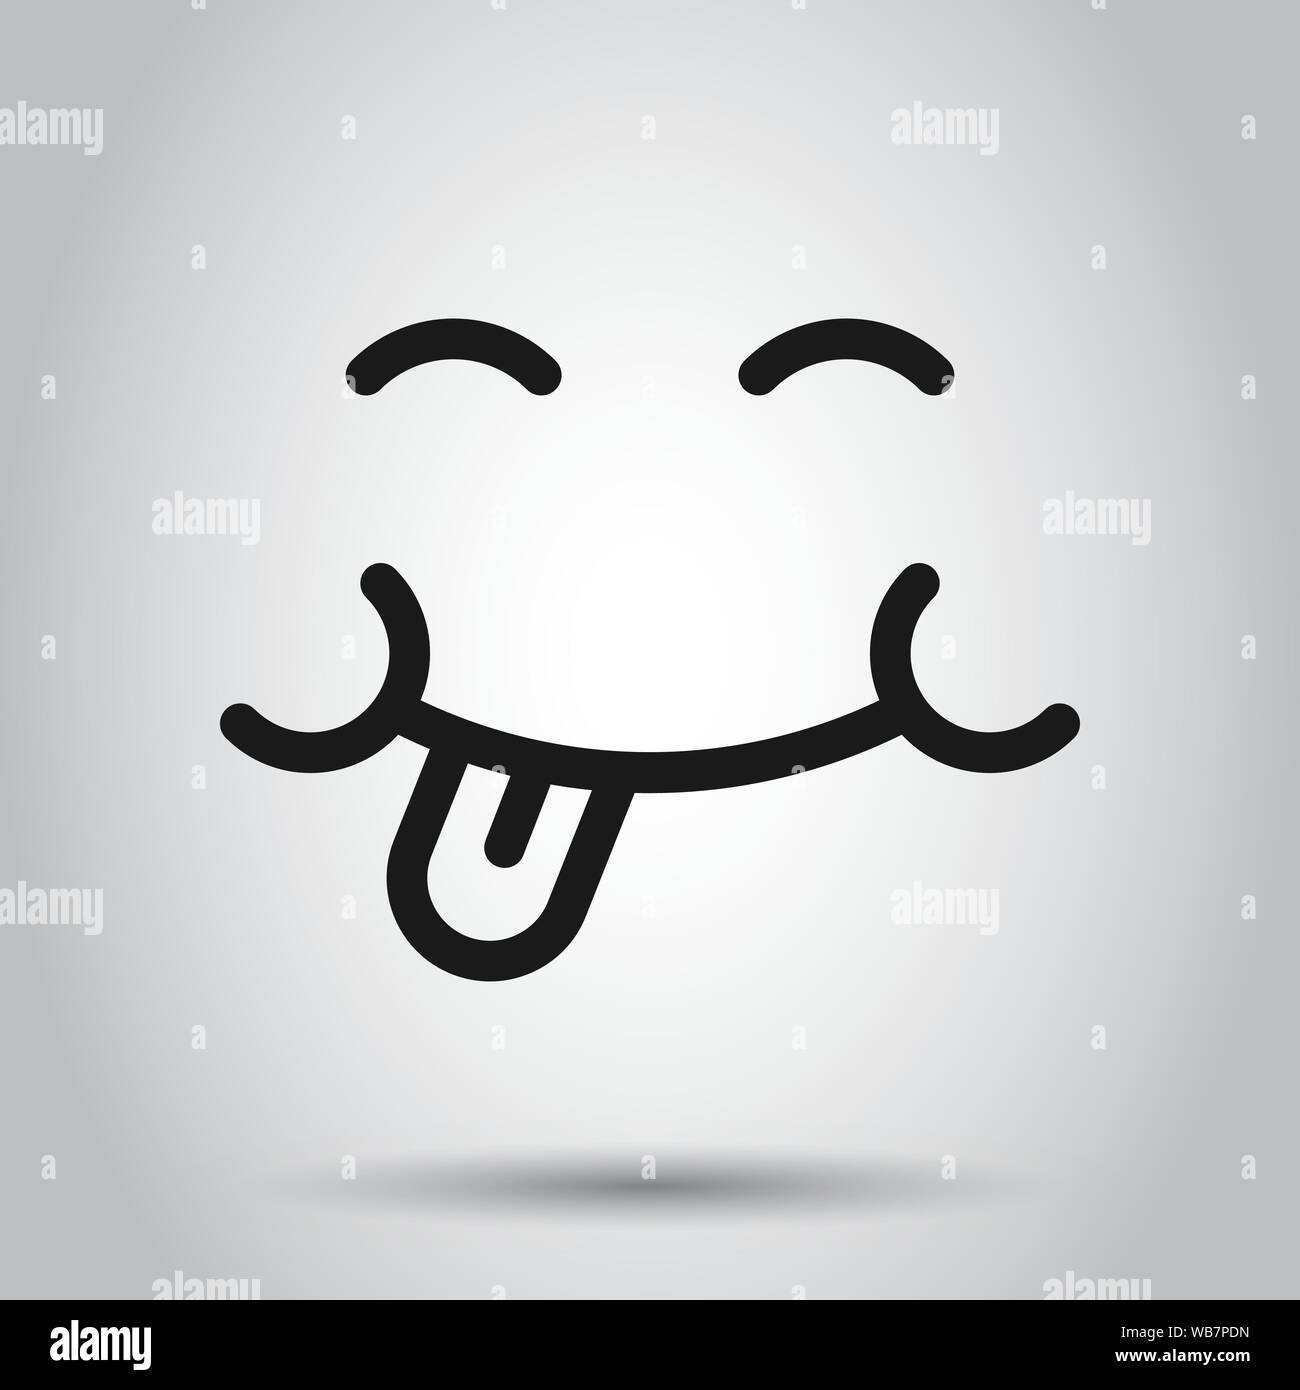 Smile face icon in flat style. Tongue emoticon vector illustration on isolated background. Funny character business concept. Stock Vector